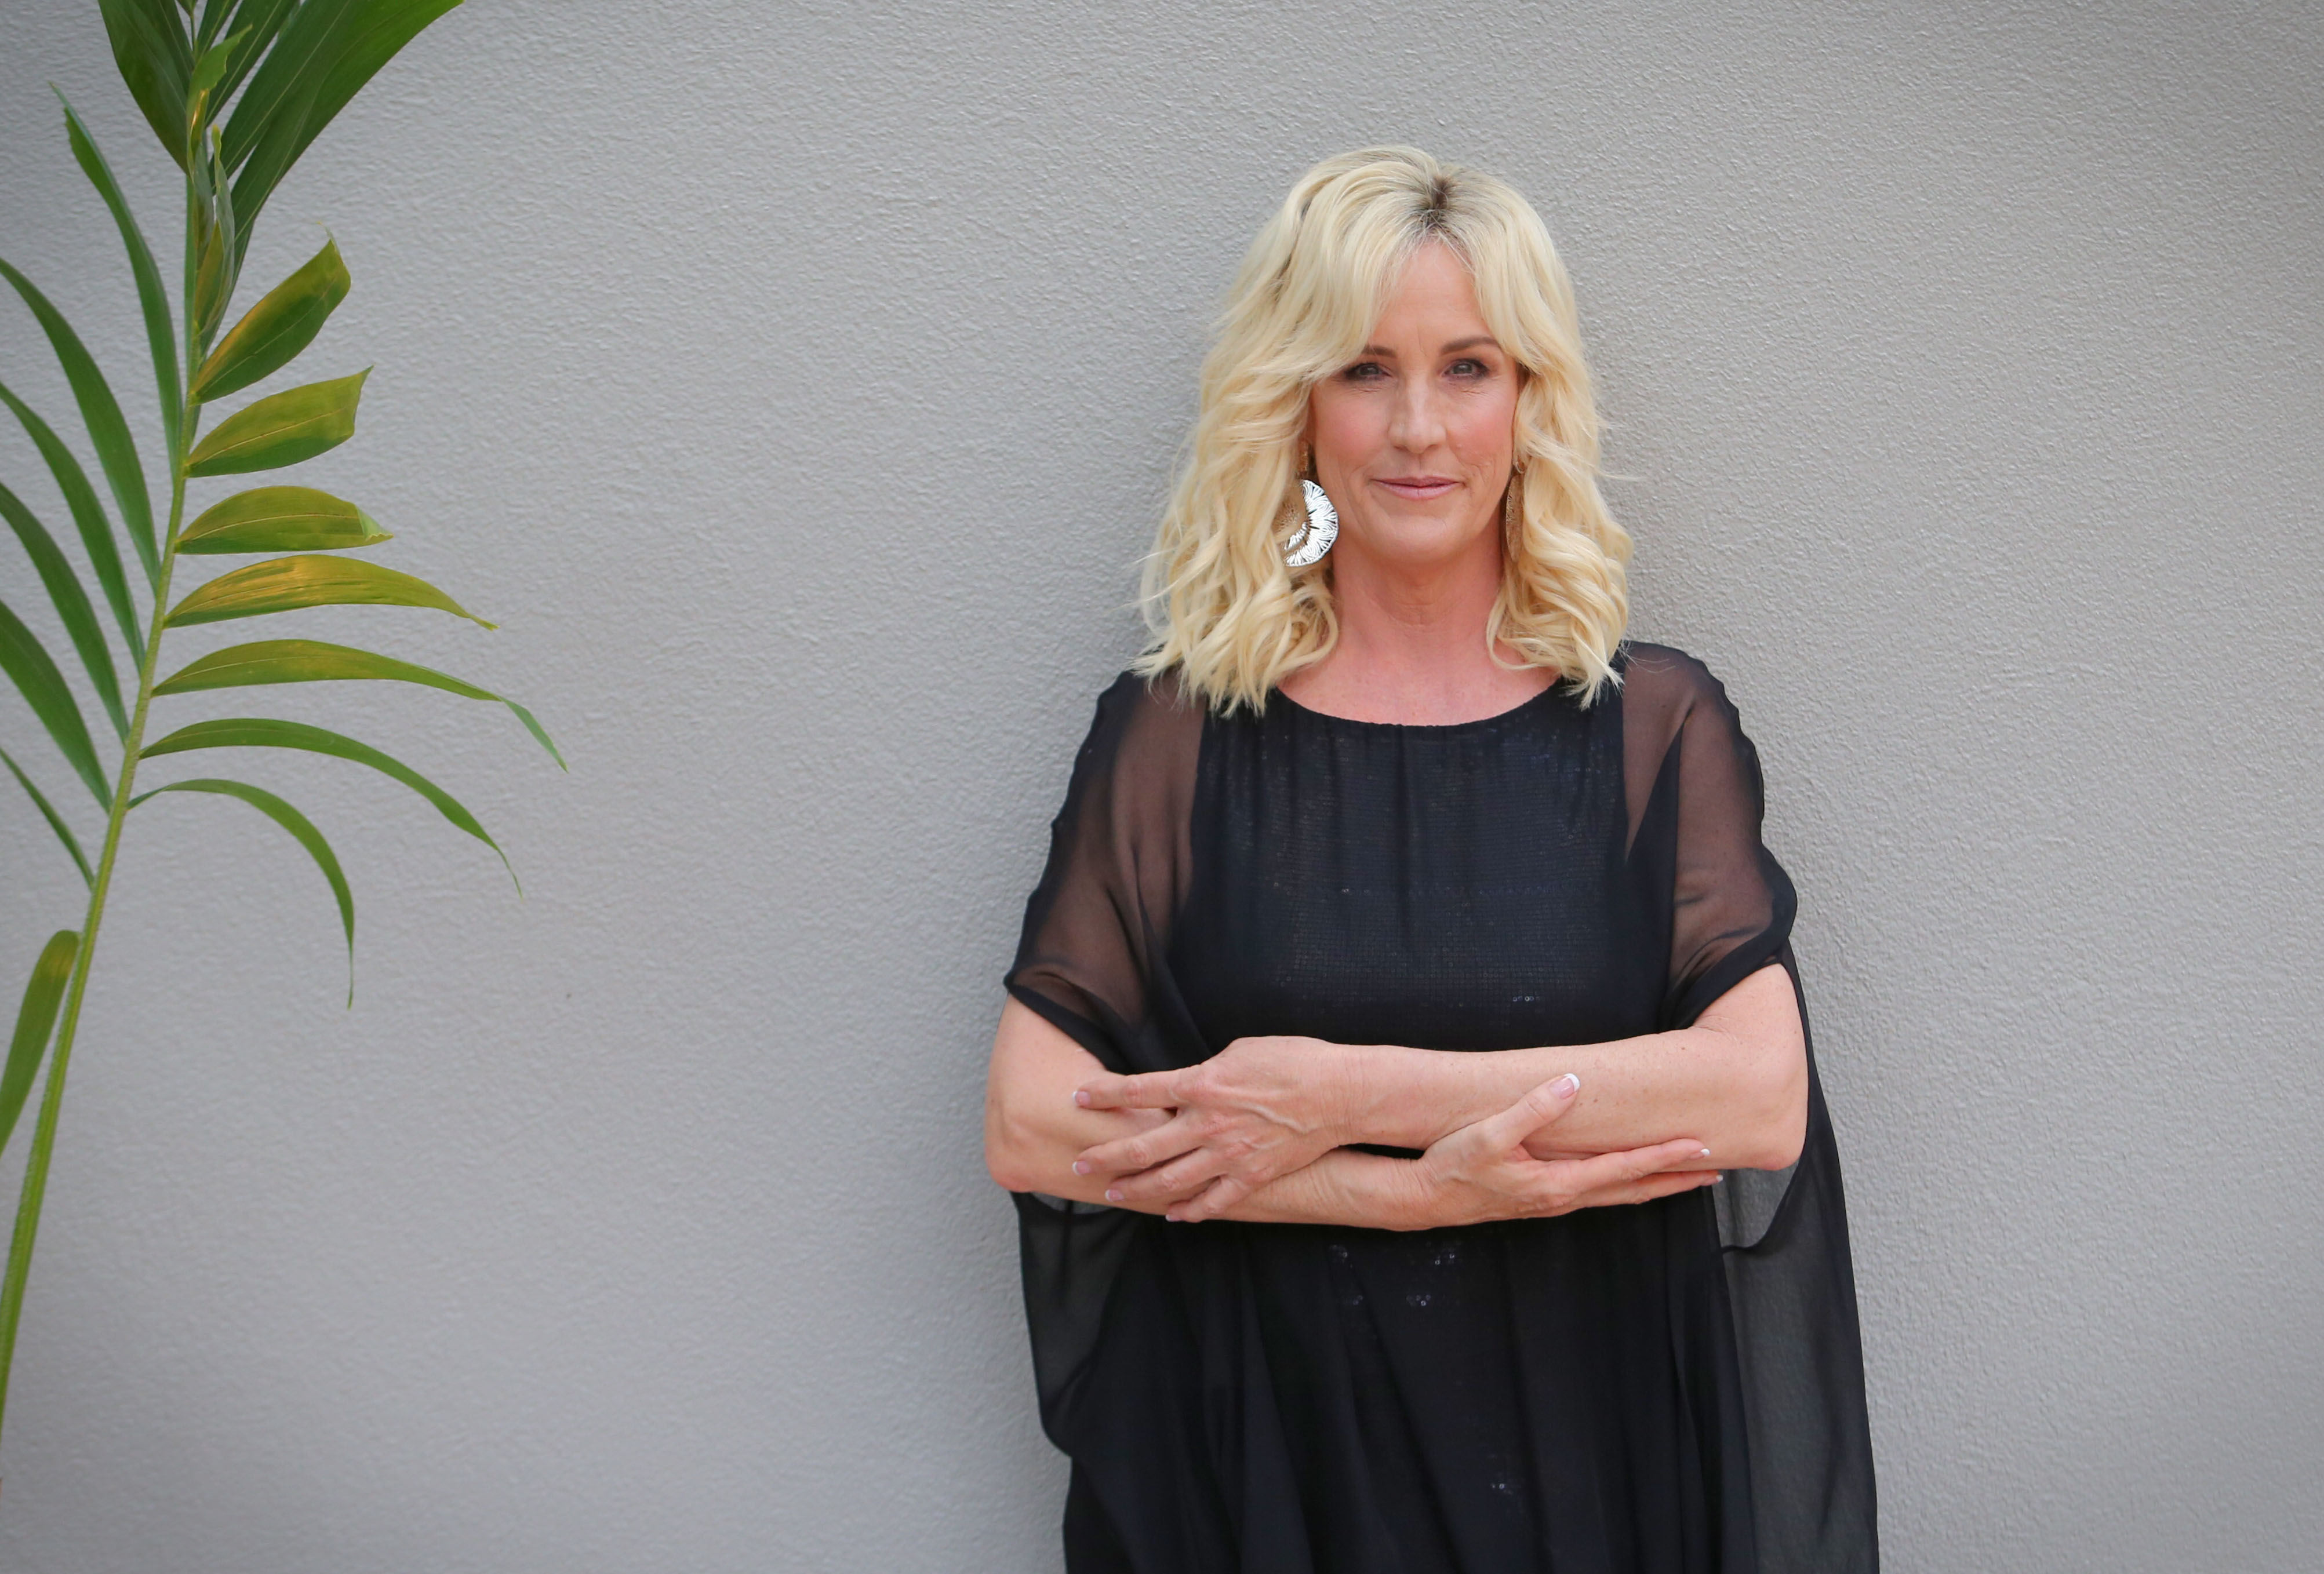 American legal clerk and environmental activist, Erin Brockovich poses during a photo shoot at the Stamford Hotel in Brisbane, Australia, on February 17, 2015.